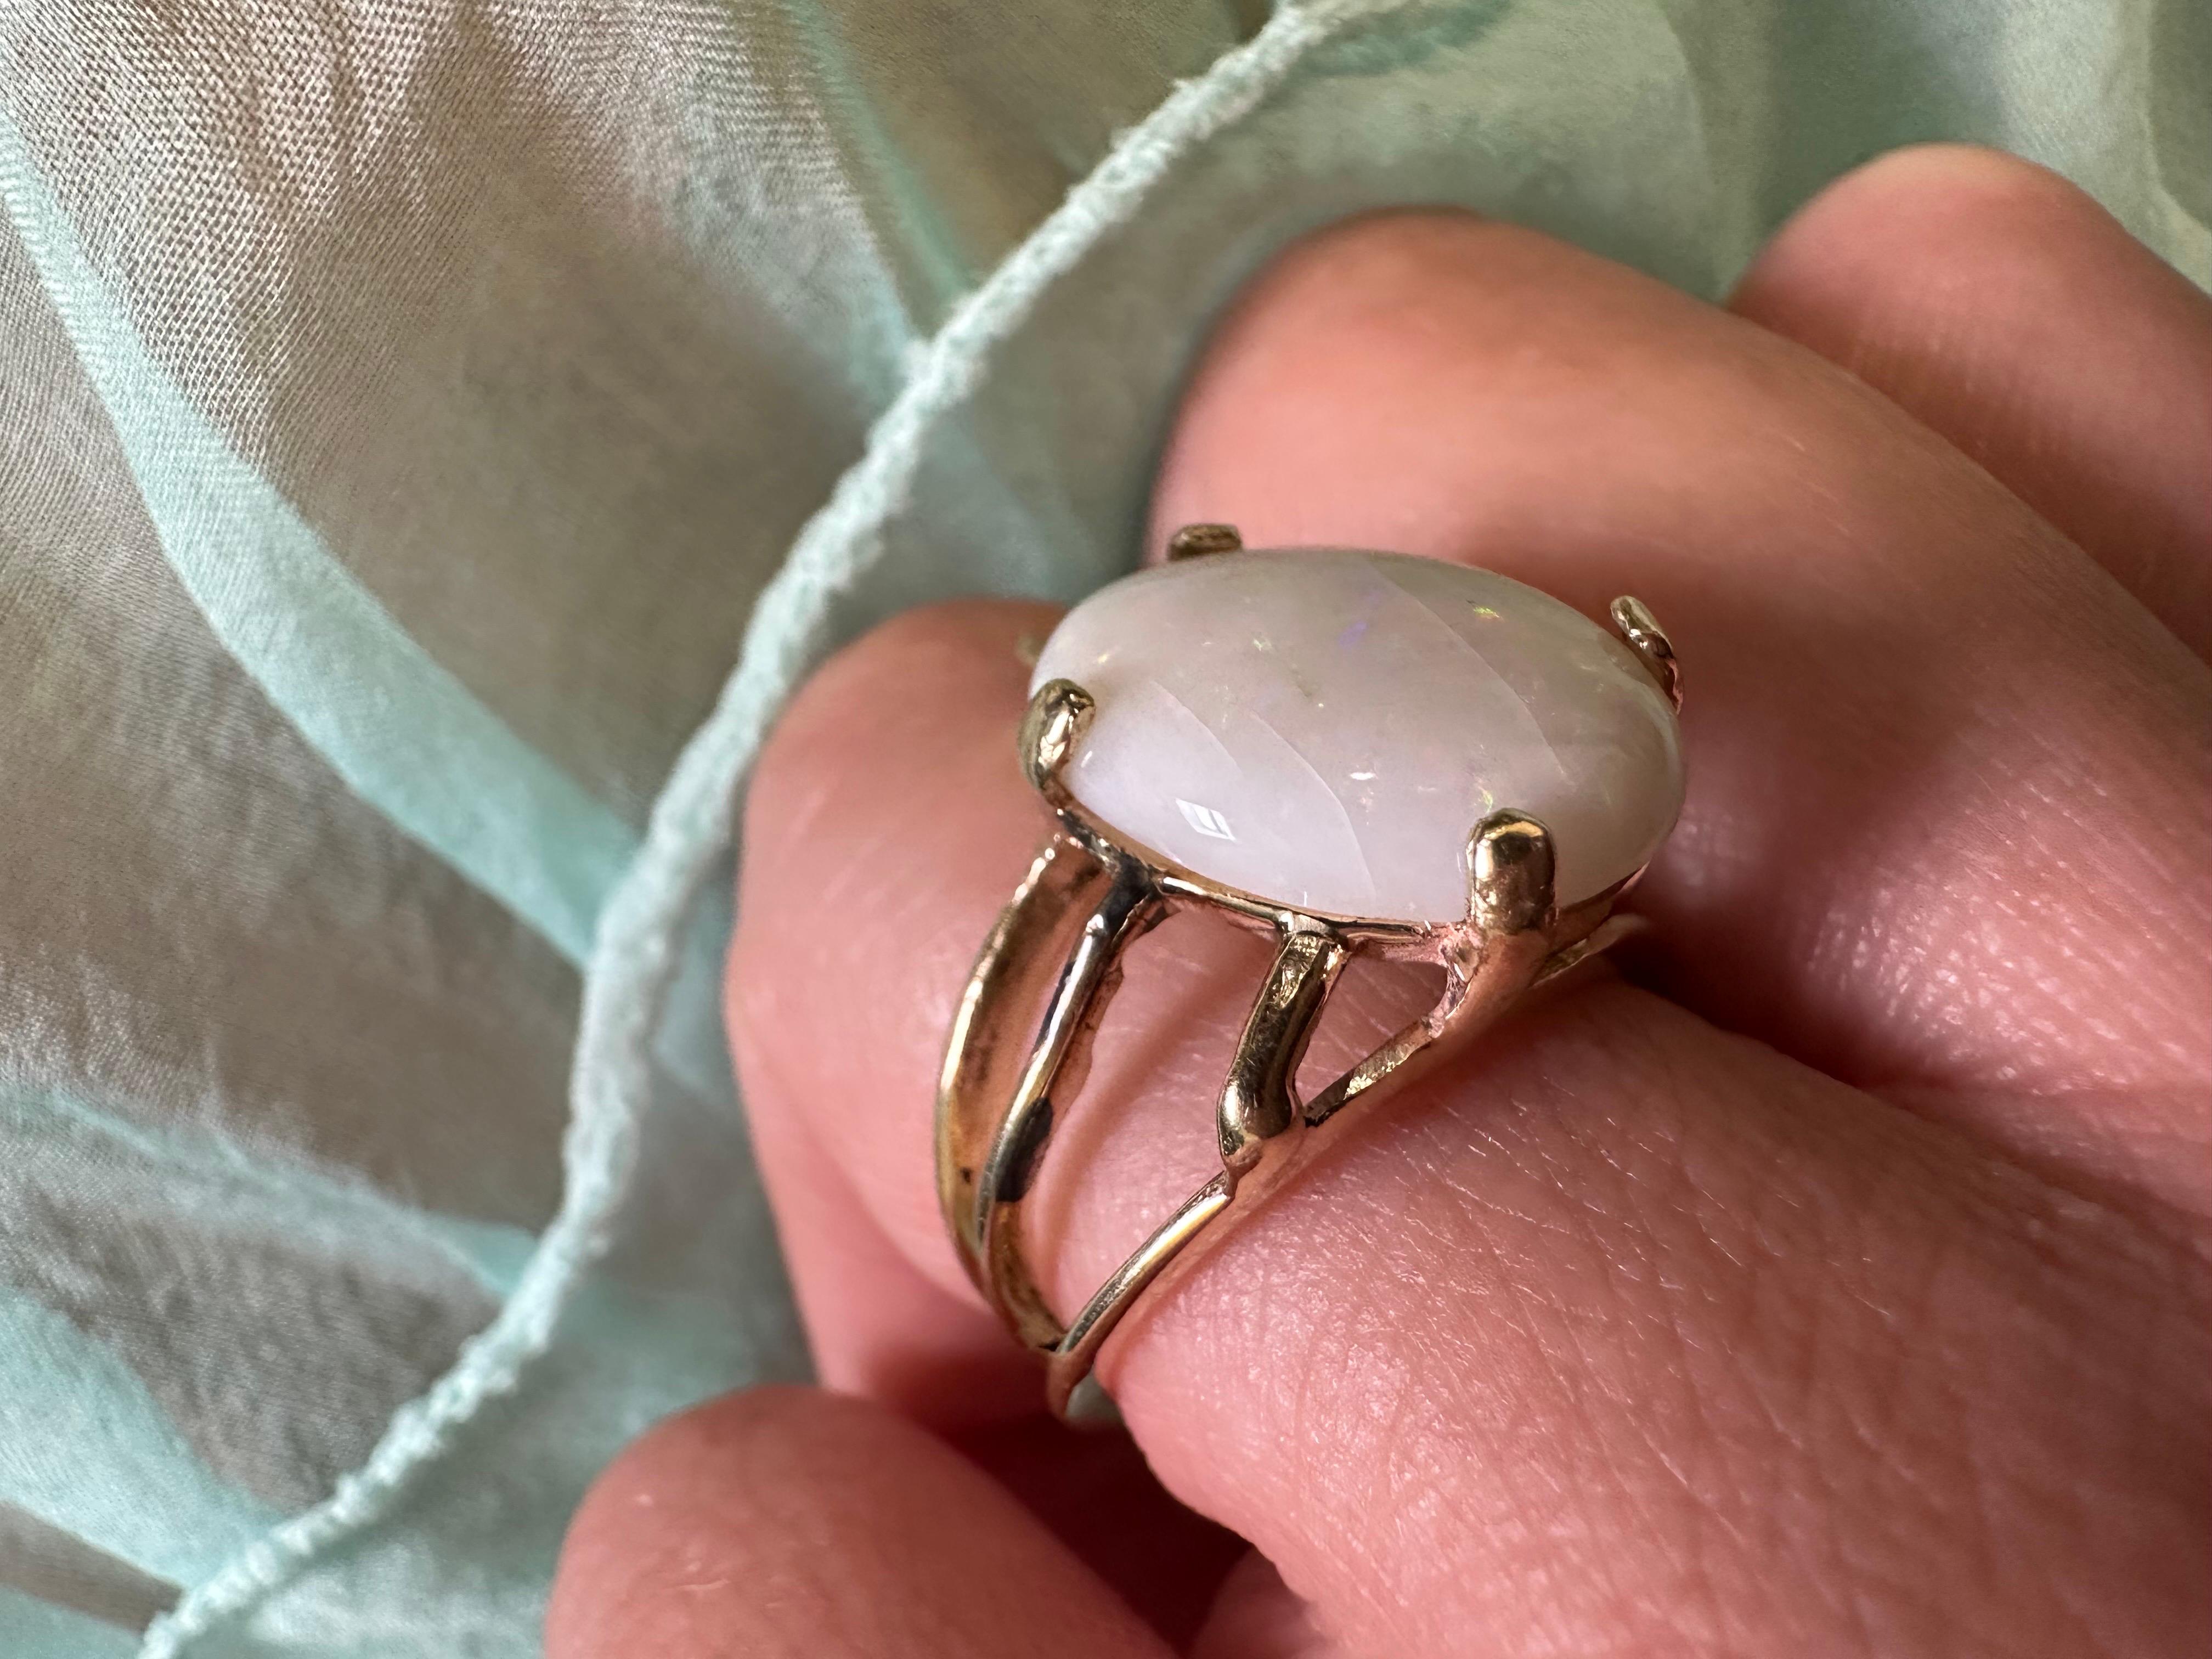 Not very standard for an opal ring, designer clearly wanted an organic feel to the ring, the opal is beautiful and natural the ring is made in 14Kt gold. Artist unknown.
Metal Type: 14KT
Certificate of authenticity comes with purchase

ABOUT US
We